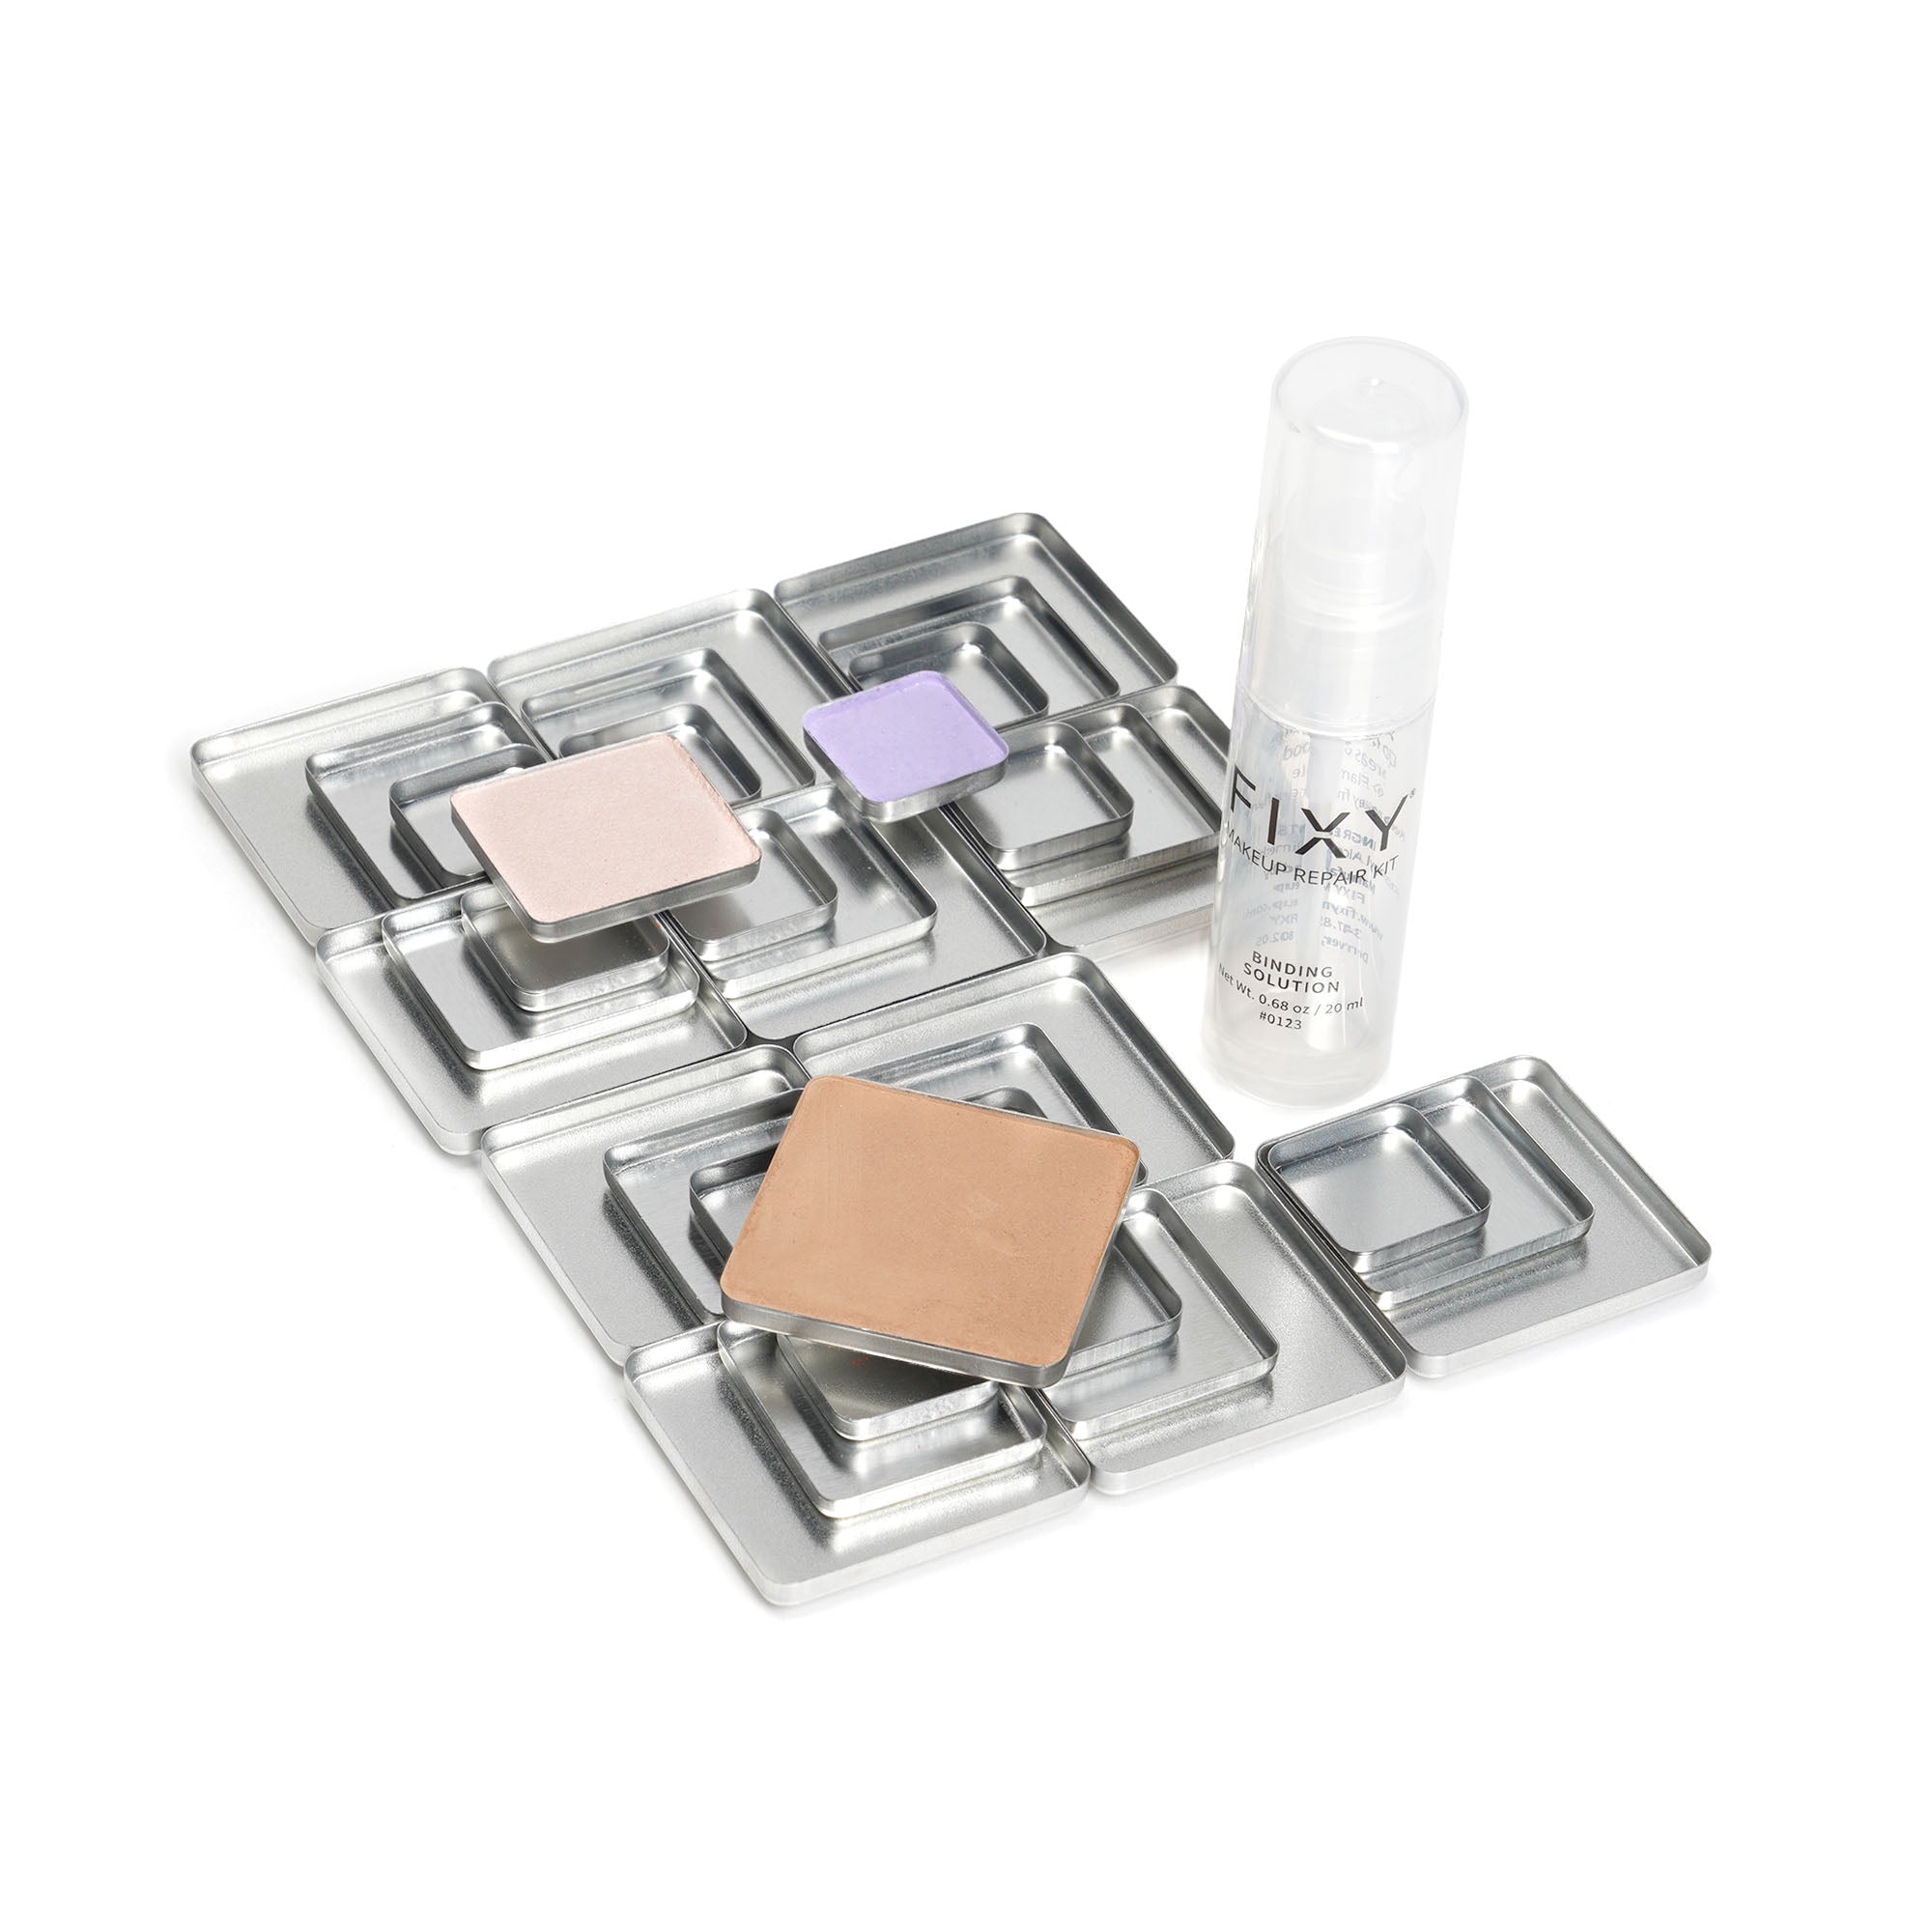 FIXY Ultimate Makeup Refill Kit with 10 each of small (21x21mm), medium (31.5x28.5mm), and large (41x41mm) empty square magnetic pans, three pans filled with makeup for display, and a 0.68 oz FIXY Binding Spray bottle, for makeup repair and customization